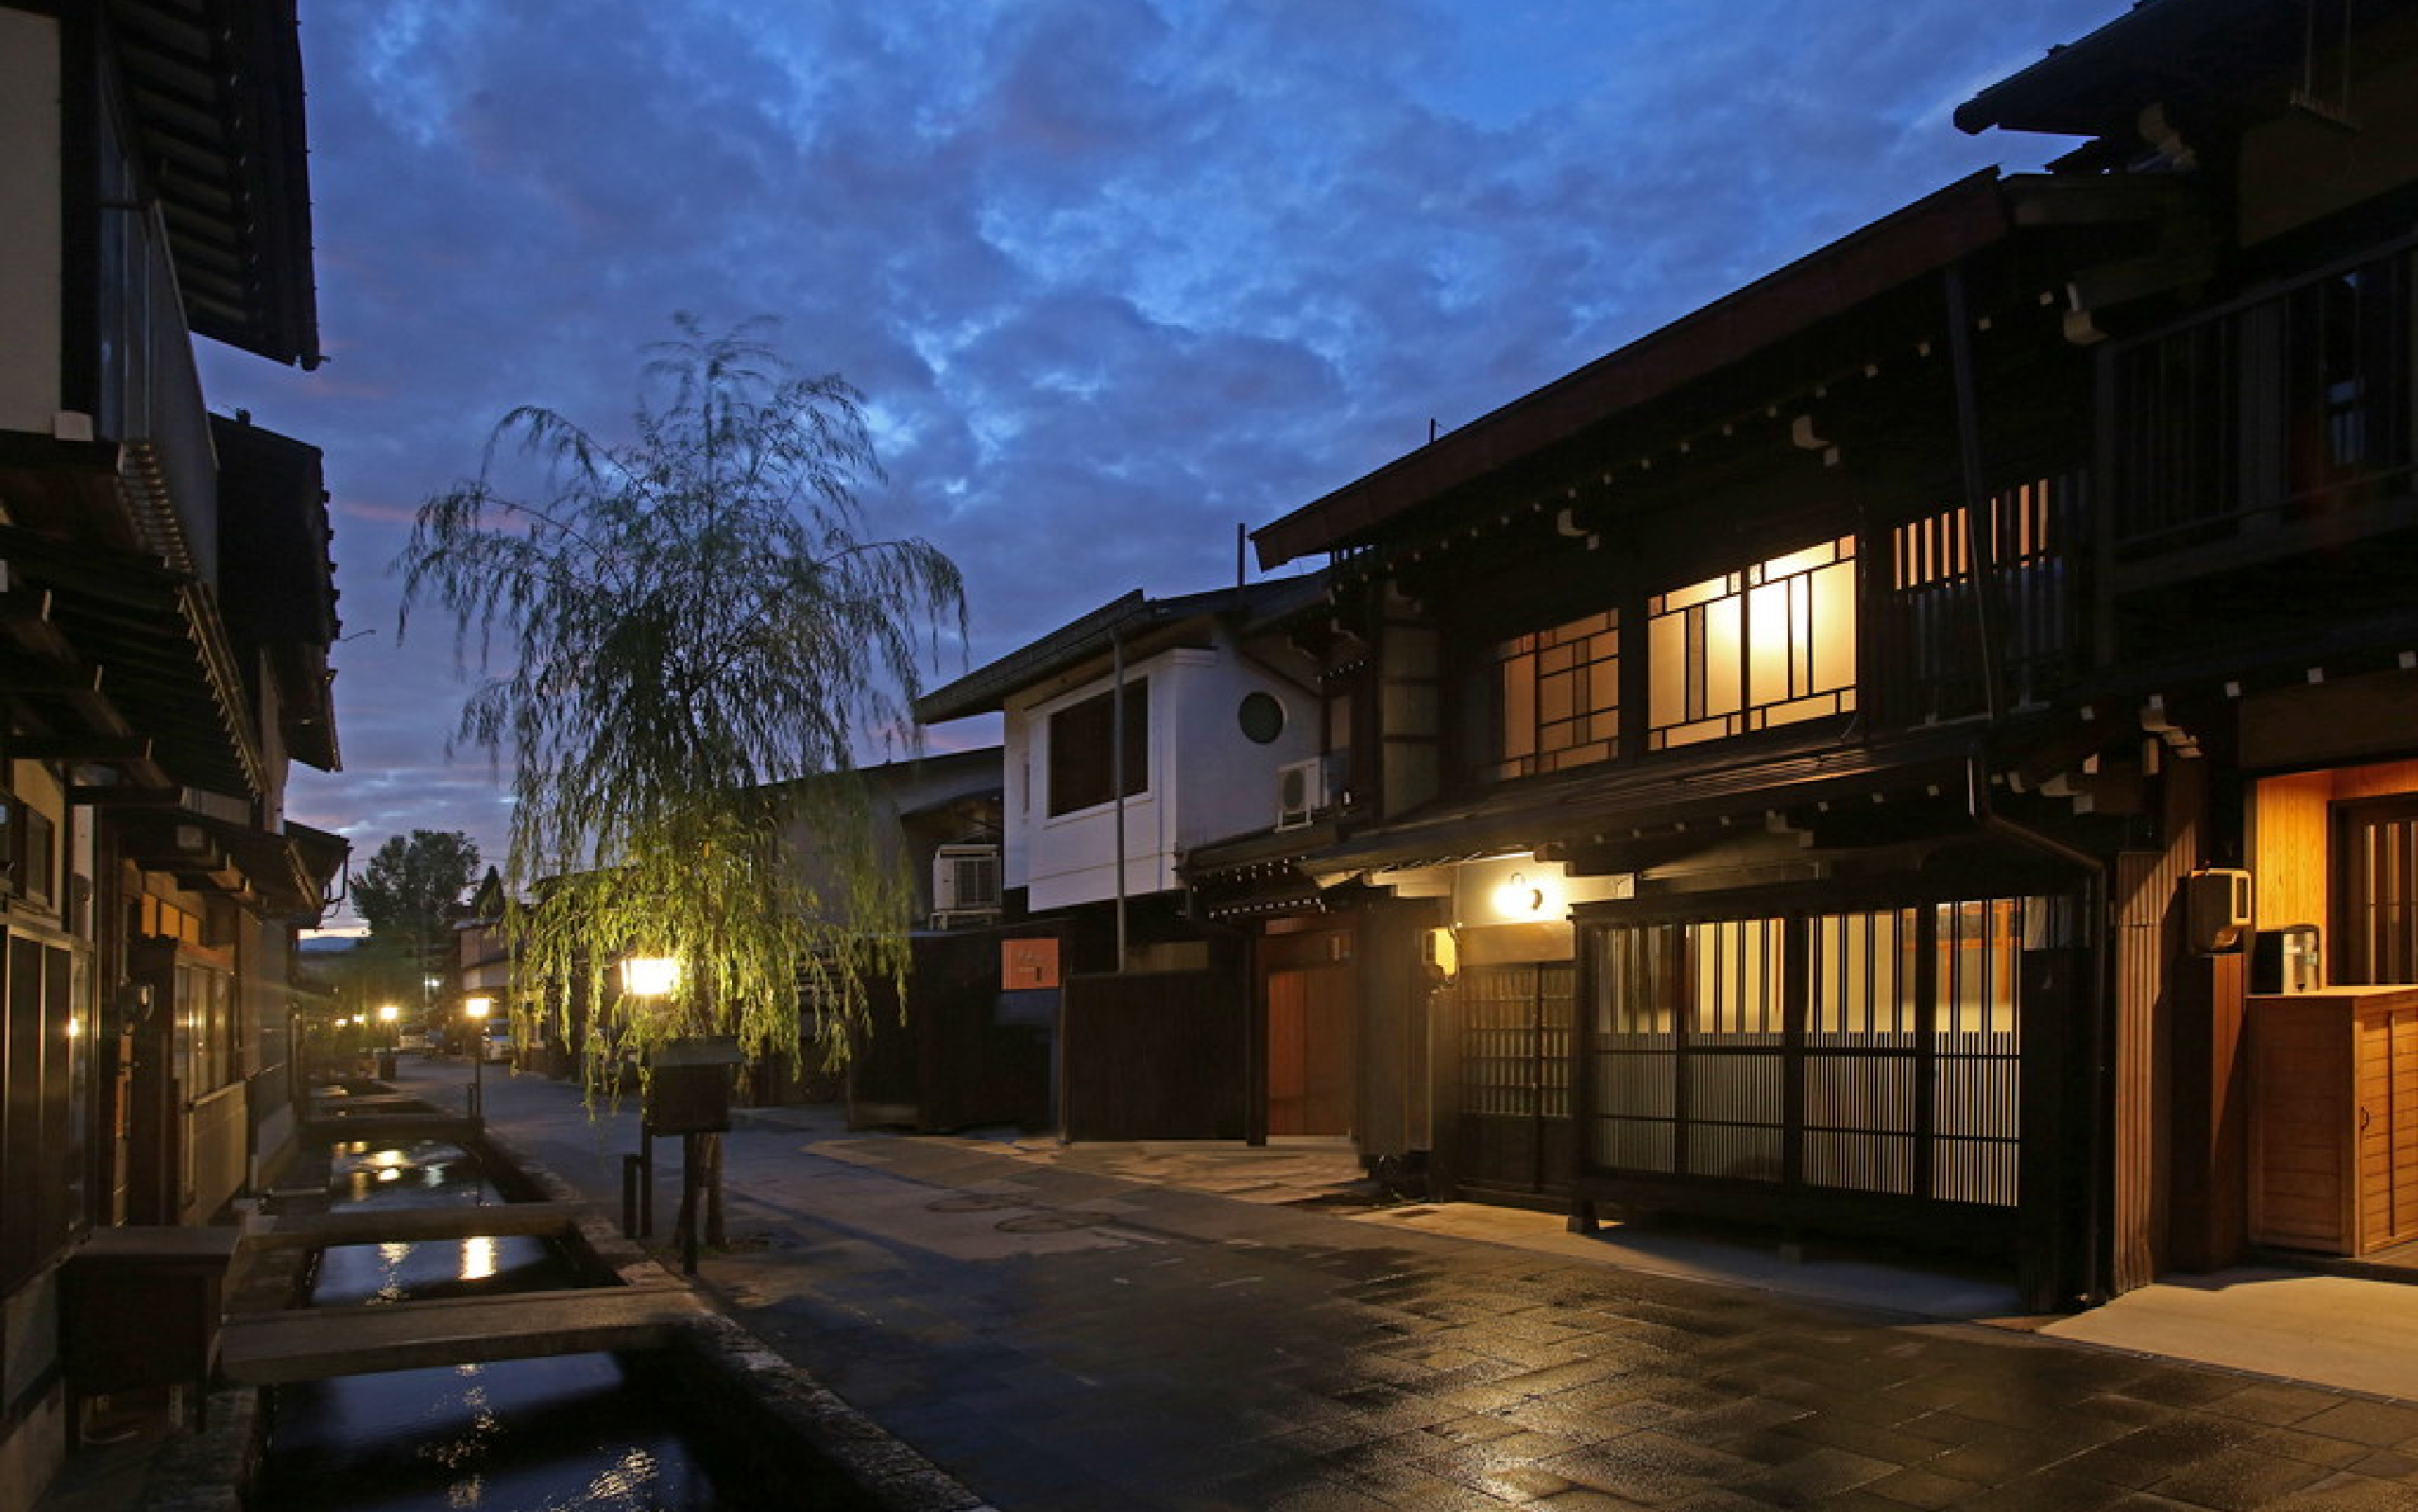 IORI STAY was featured in JNTO／REMOTE, EXCLUSIVE-USE STAYS IN JAPAN